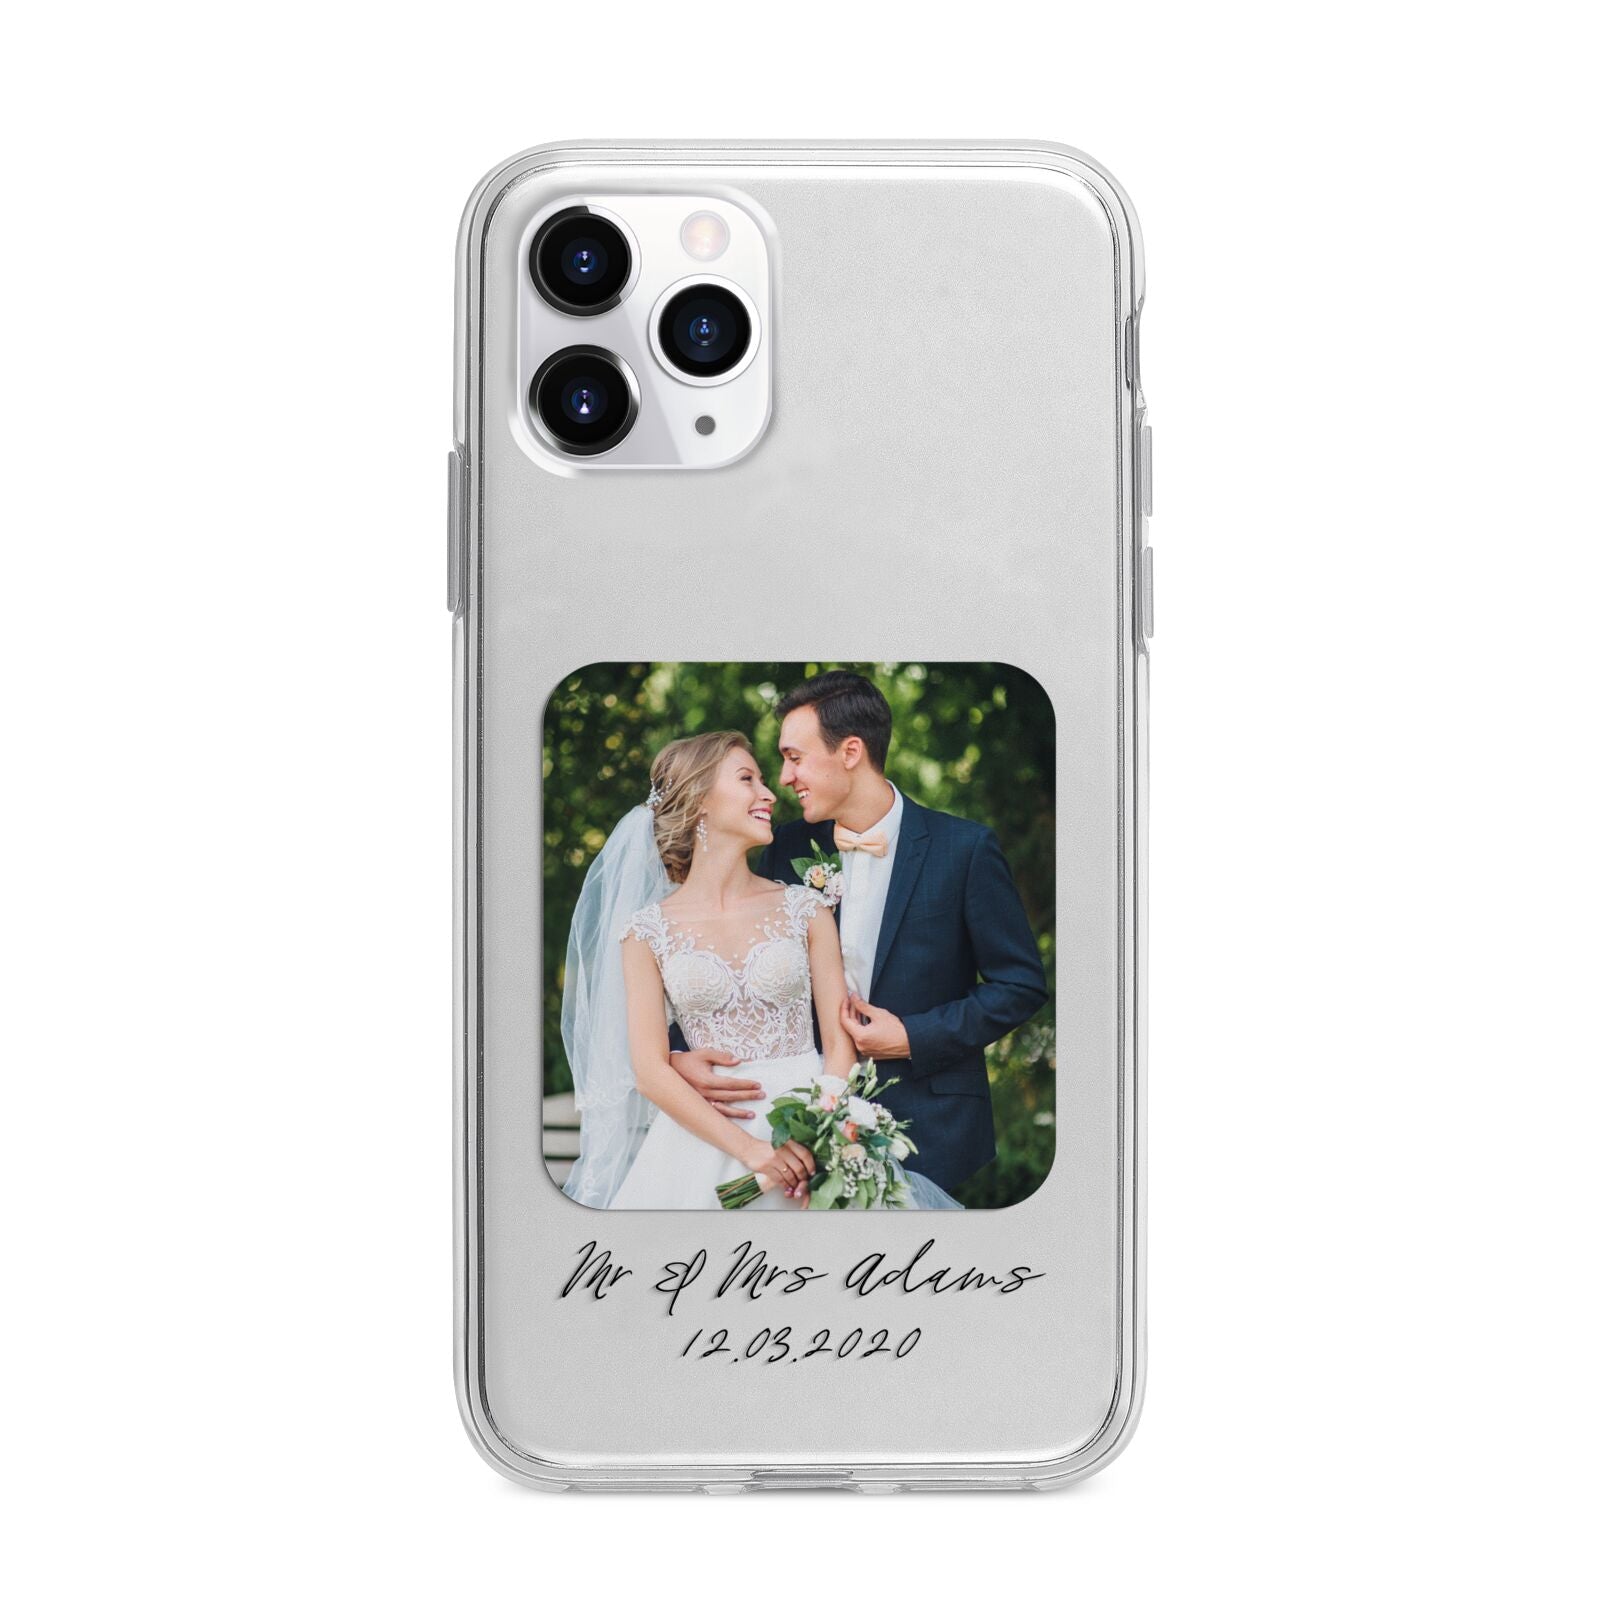 Wedding Photo Upload Keepsake with Text Apple iPhone 11 Pro Max in Silver with Bumper Case